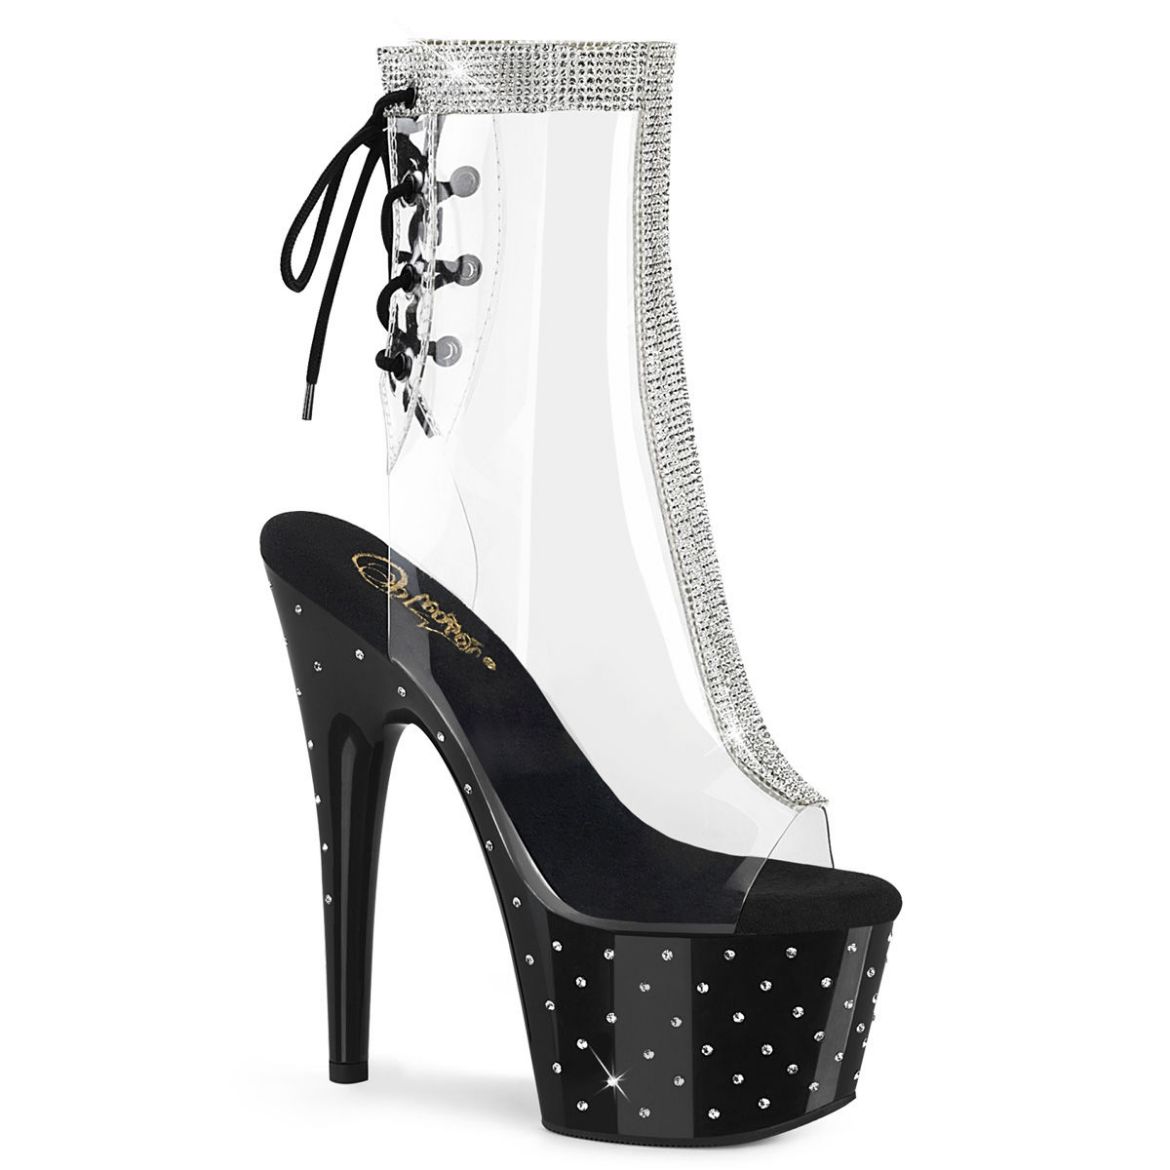 Product image of Pleaser STARDUST-1018C-2RS Clear/Black 7 inch (17.8 cm) Heel 2 3/4 inch (7 cm) Platform Open Toe/Heel Ankle Boot With Rhinestones